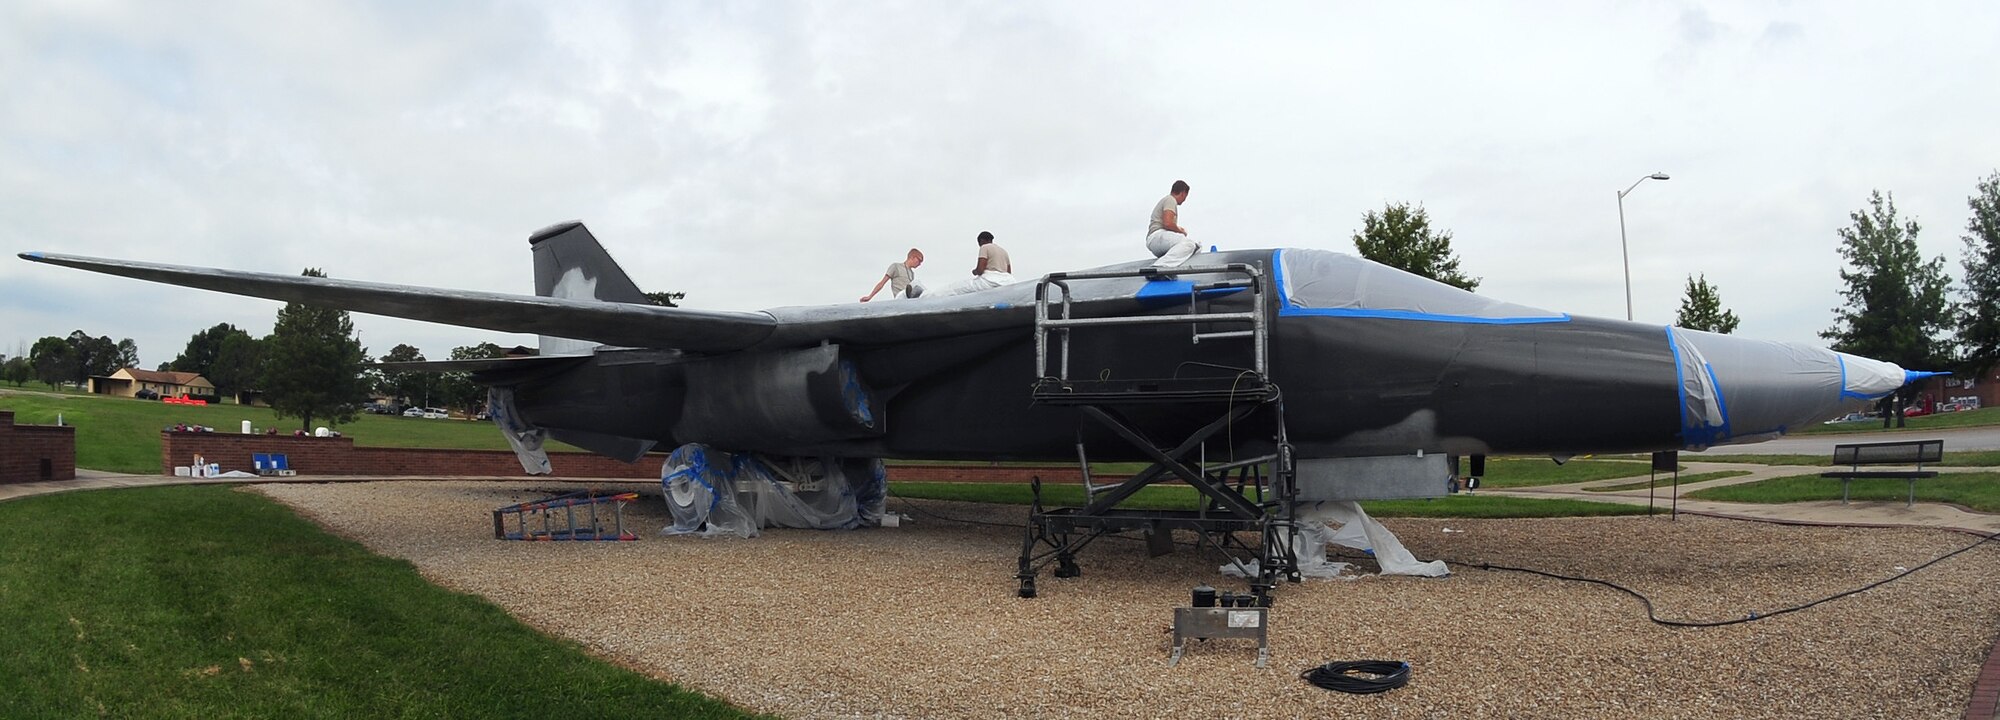 Low observable technicians from the 509th Maintenance Squadron tape off sections of an FB-111A General Dynamics Aardvark static display prior to repainting it at Whiteman Air Force Base, Mo., Sept. 13, 2016. During the restoration process, the aircraft was sanded, primed, repainted and received corrosion maintenance. (U.S. Air Force photo by Senior Airman Joel Pfiester)